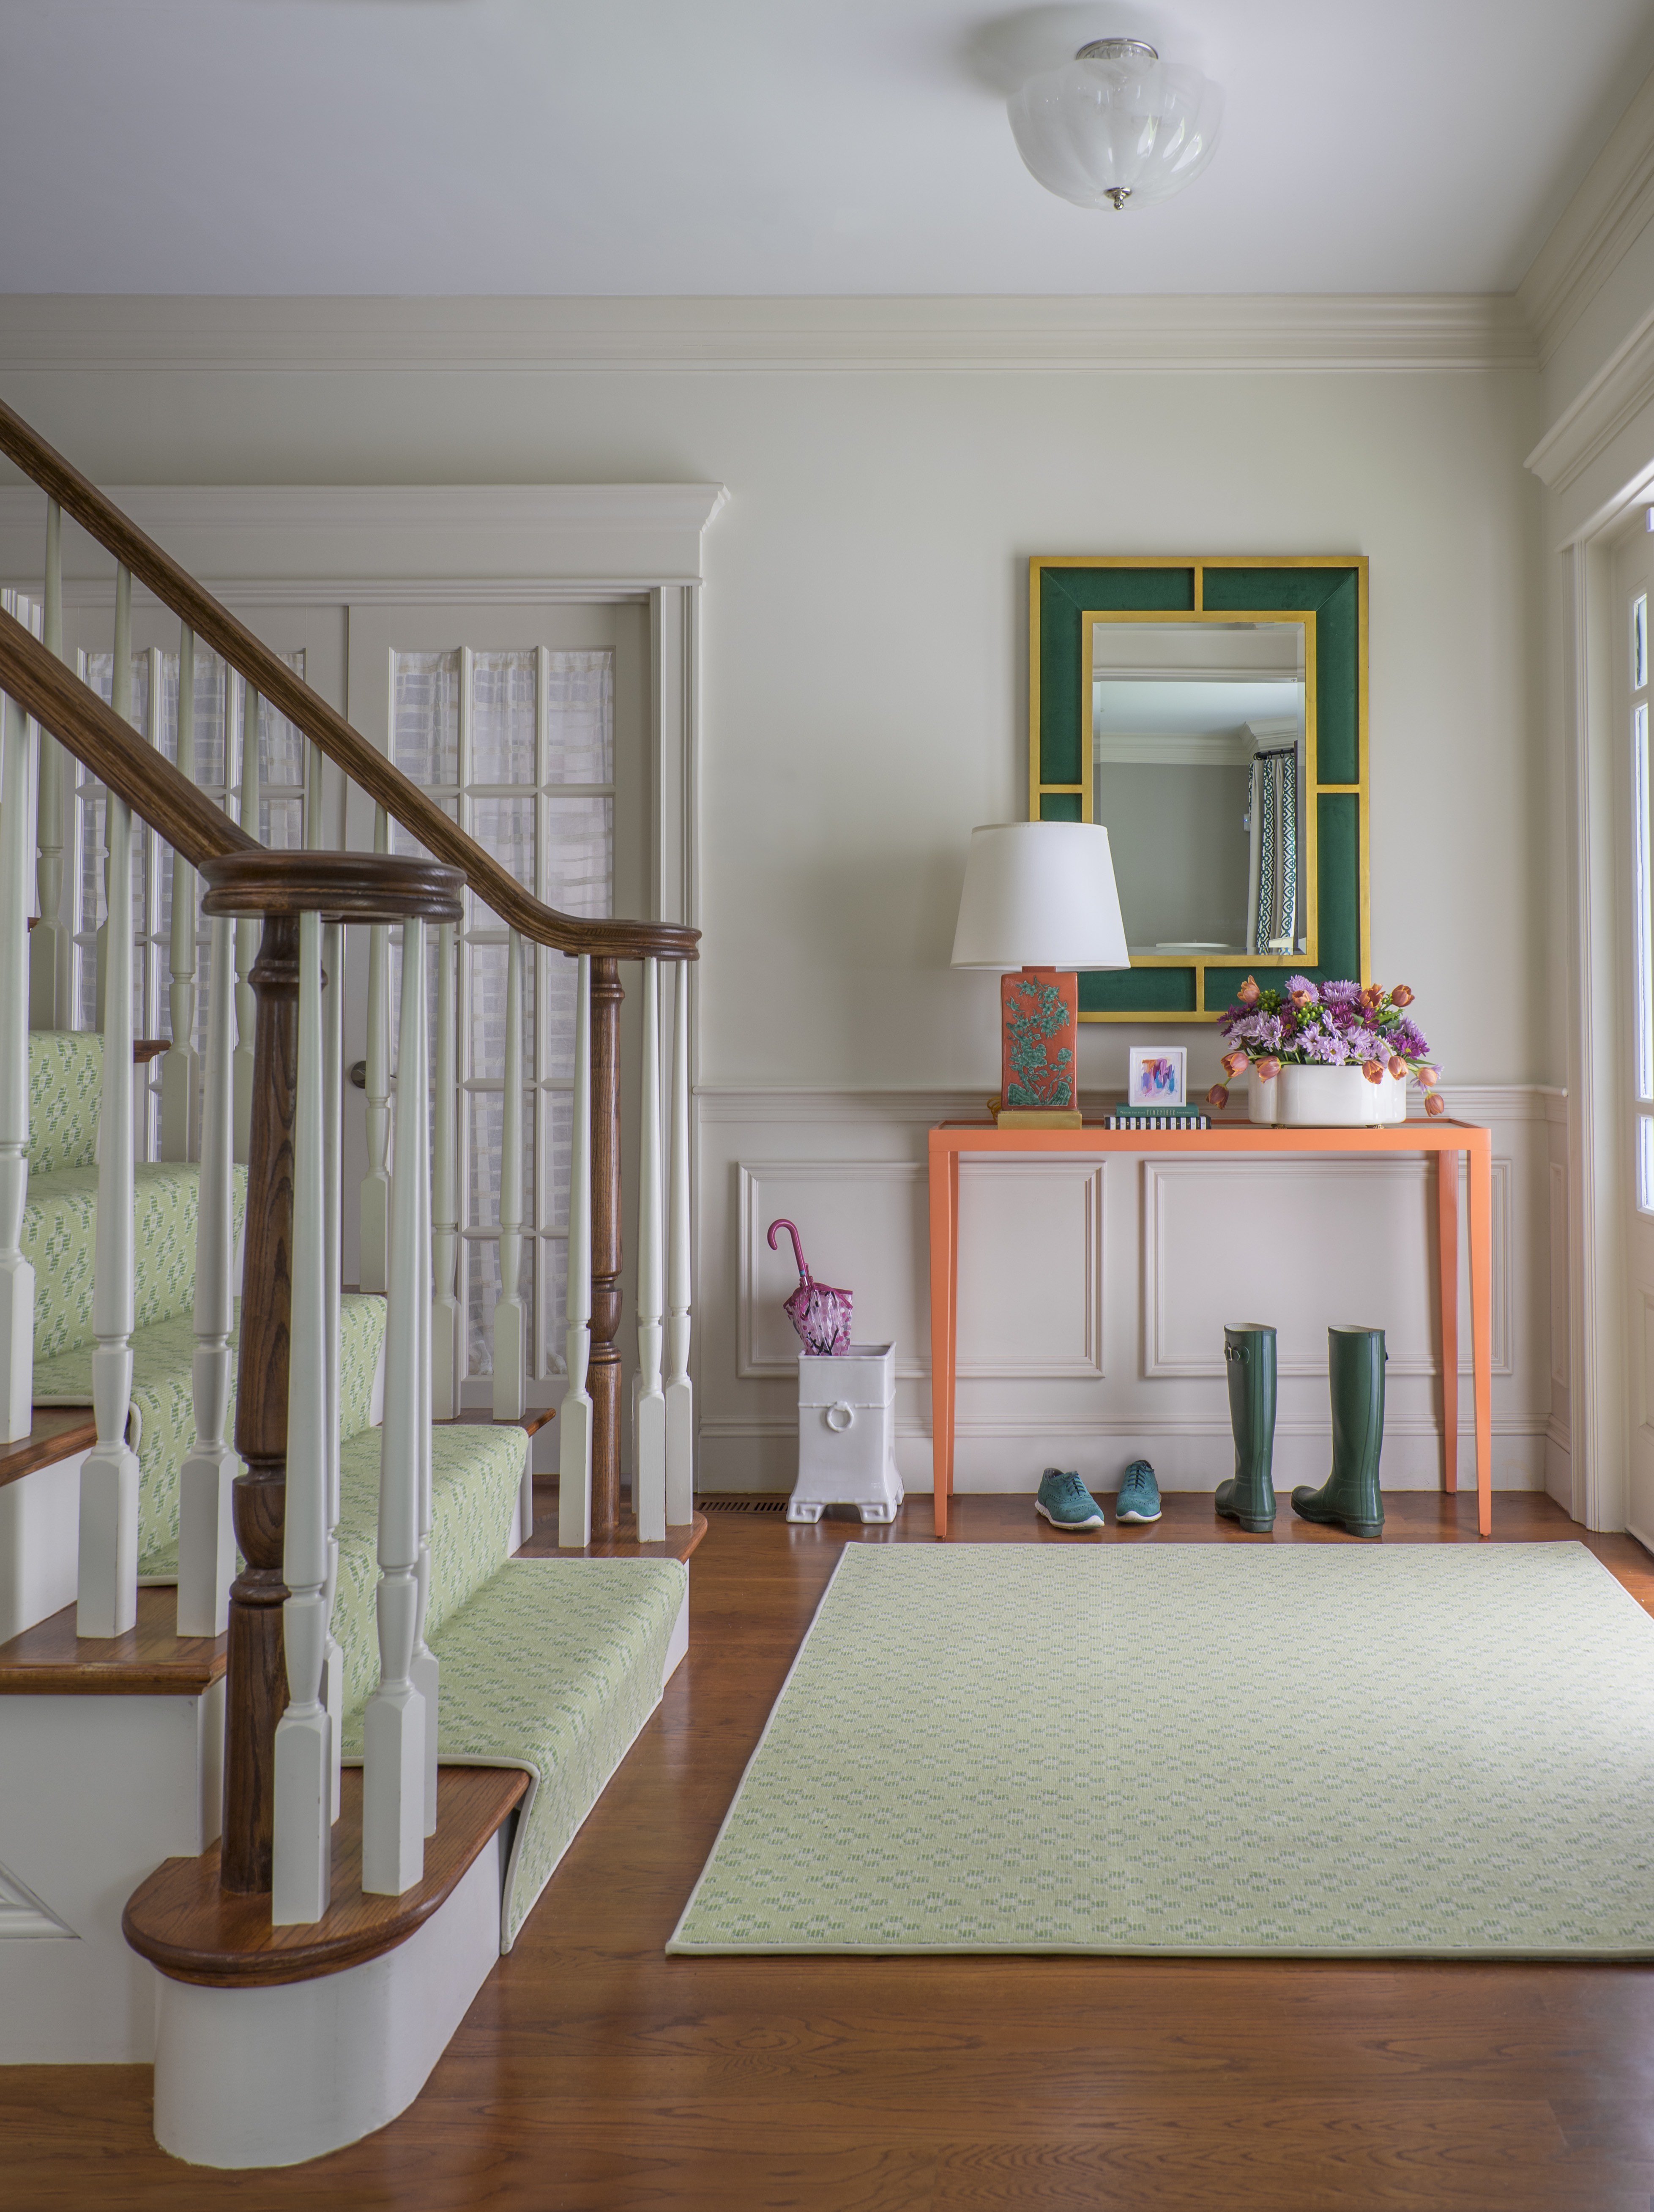 Project Reveal: Lexington Green | Kelly Rogers Interiors | Interiors for Families